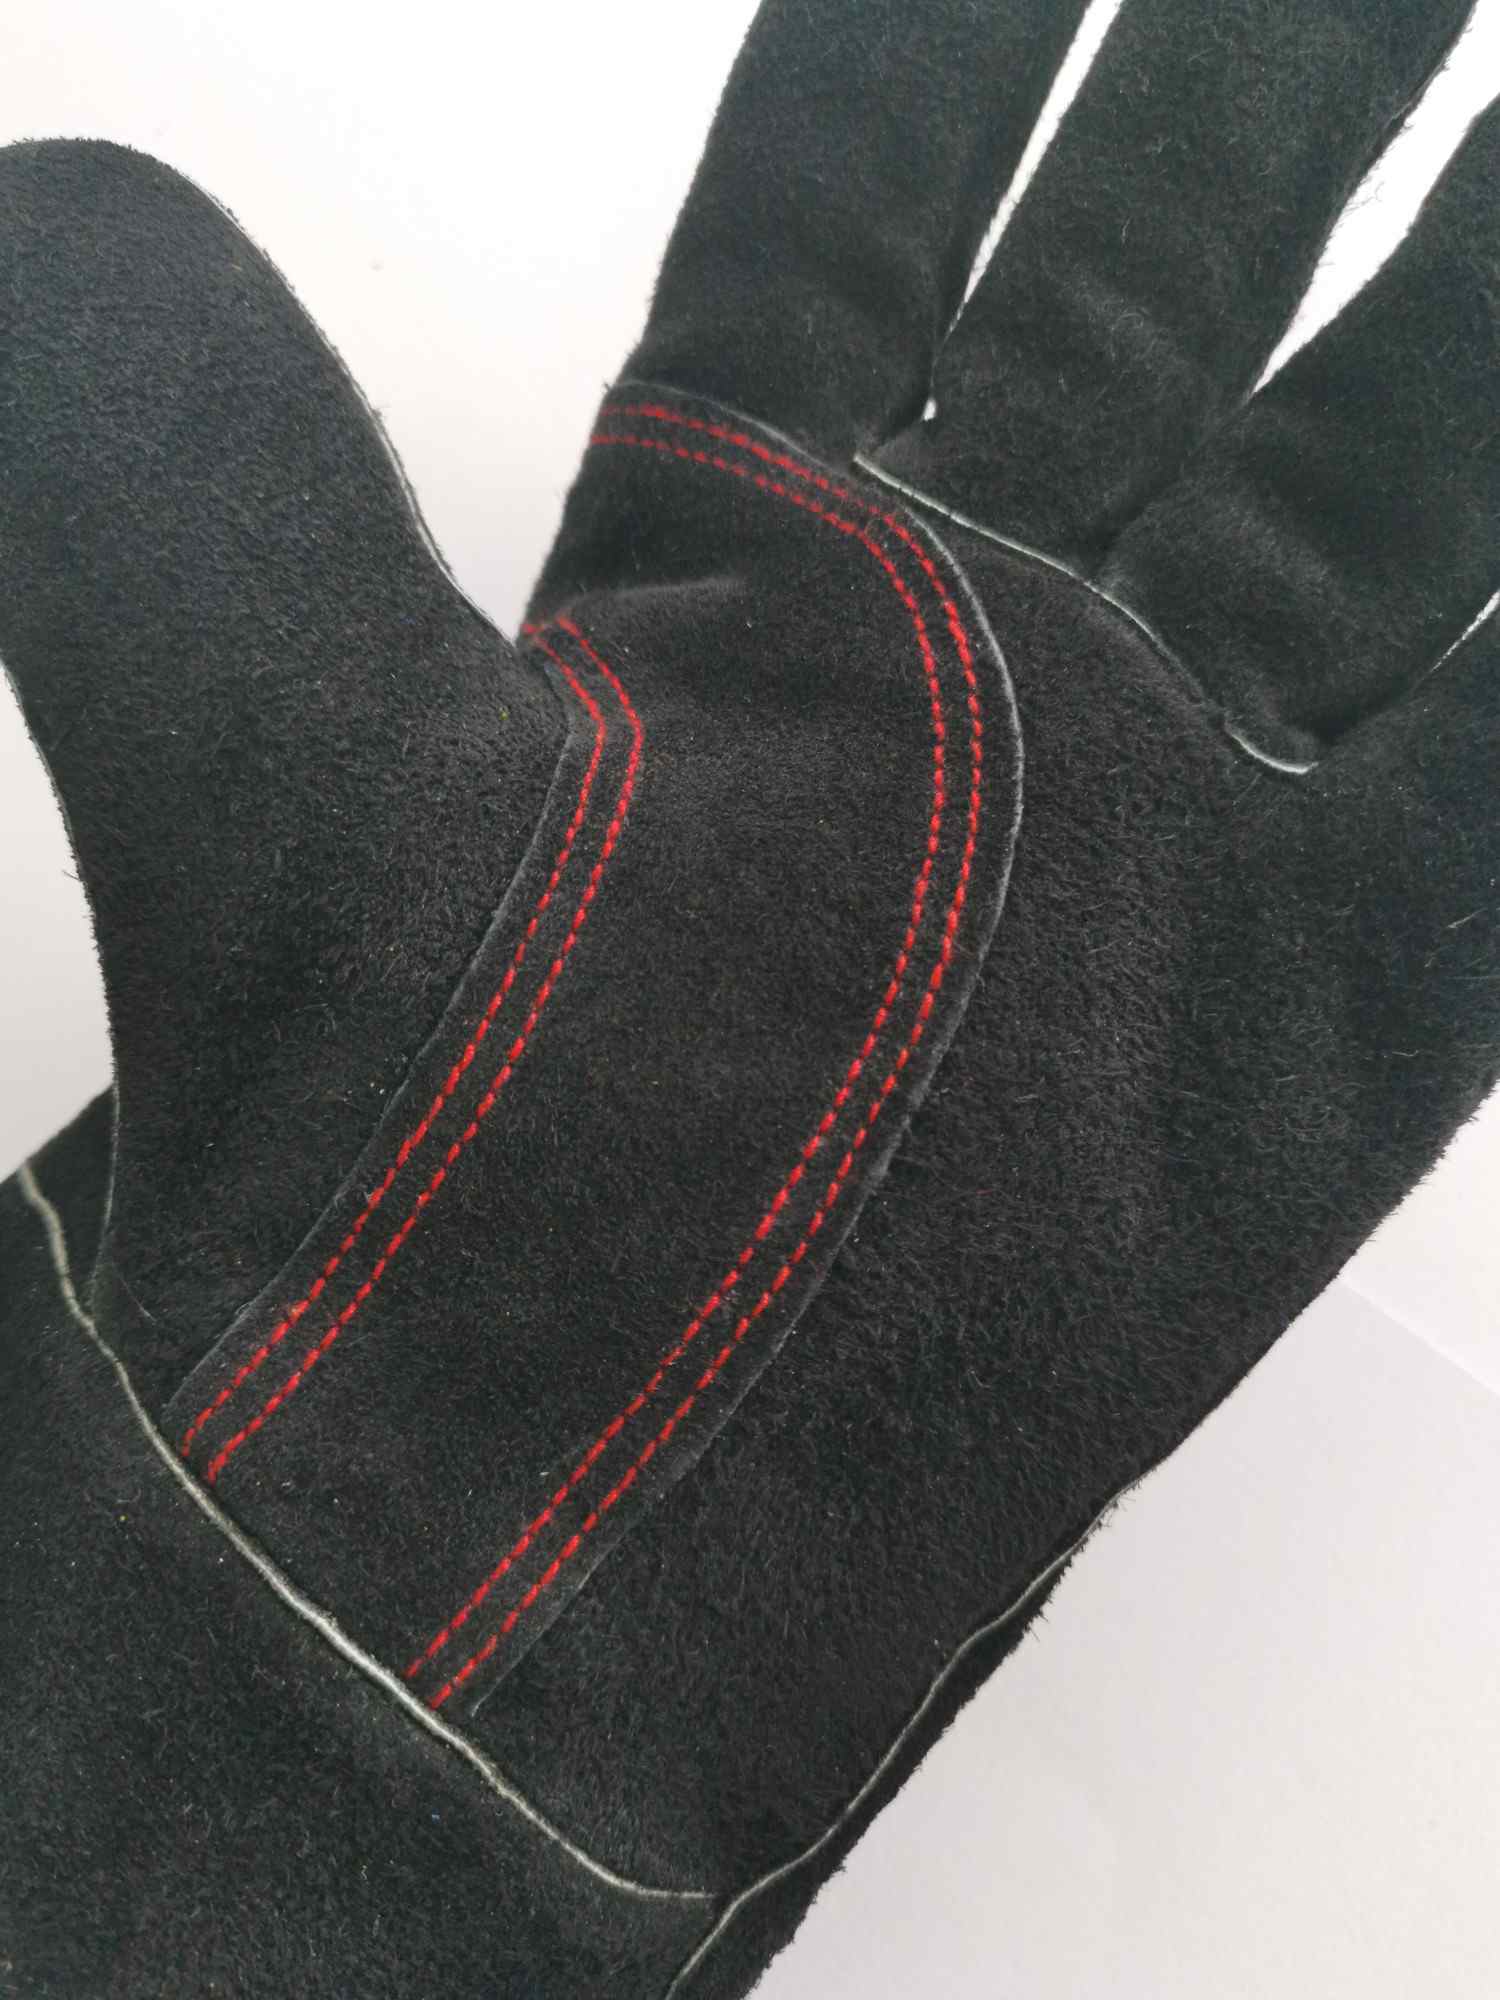 welding leather gloves palm